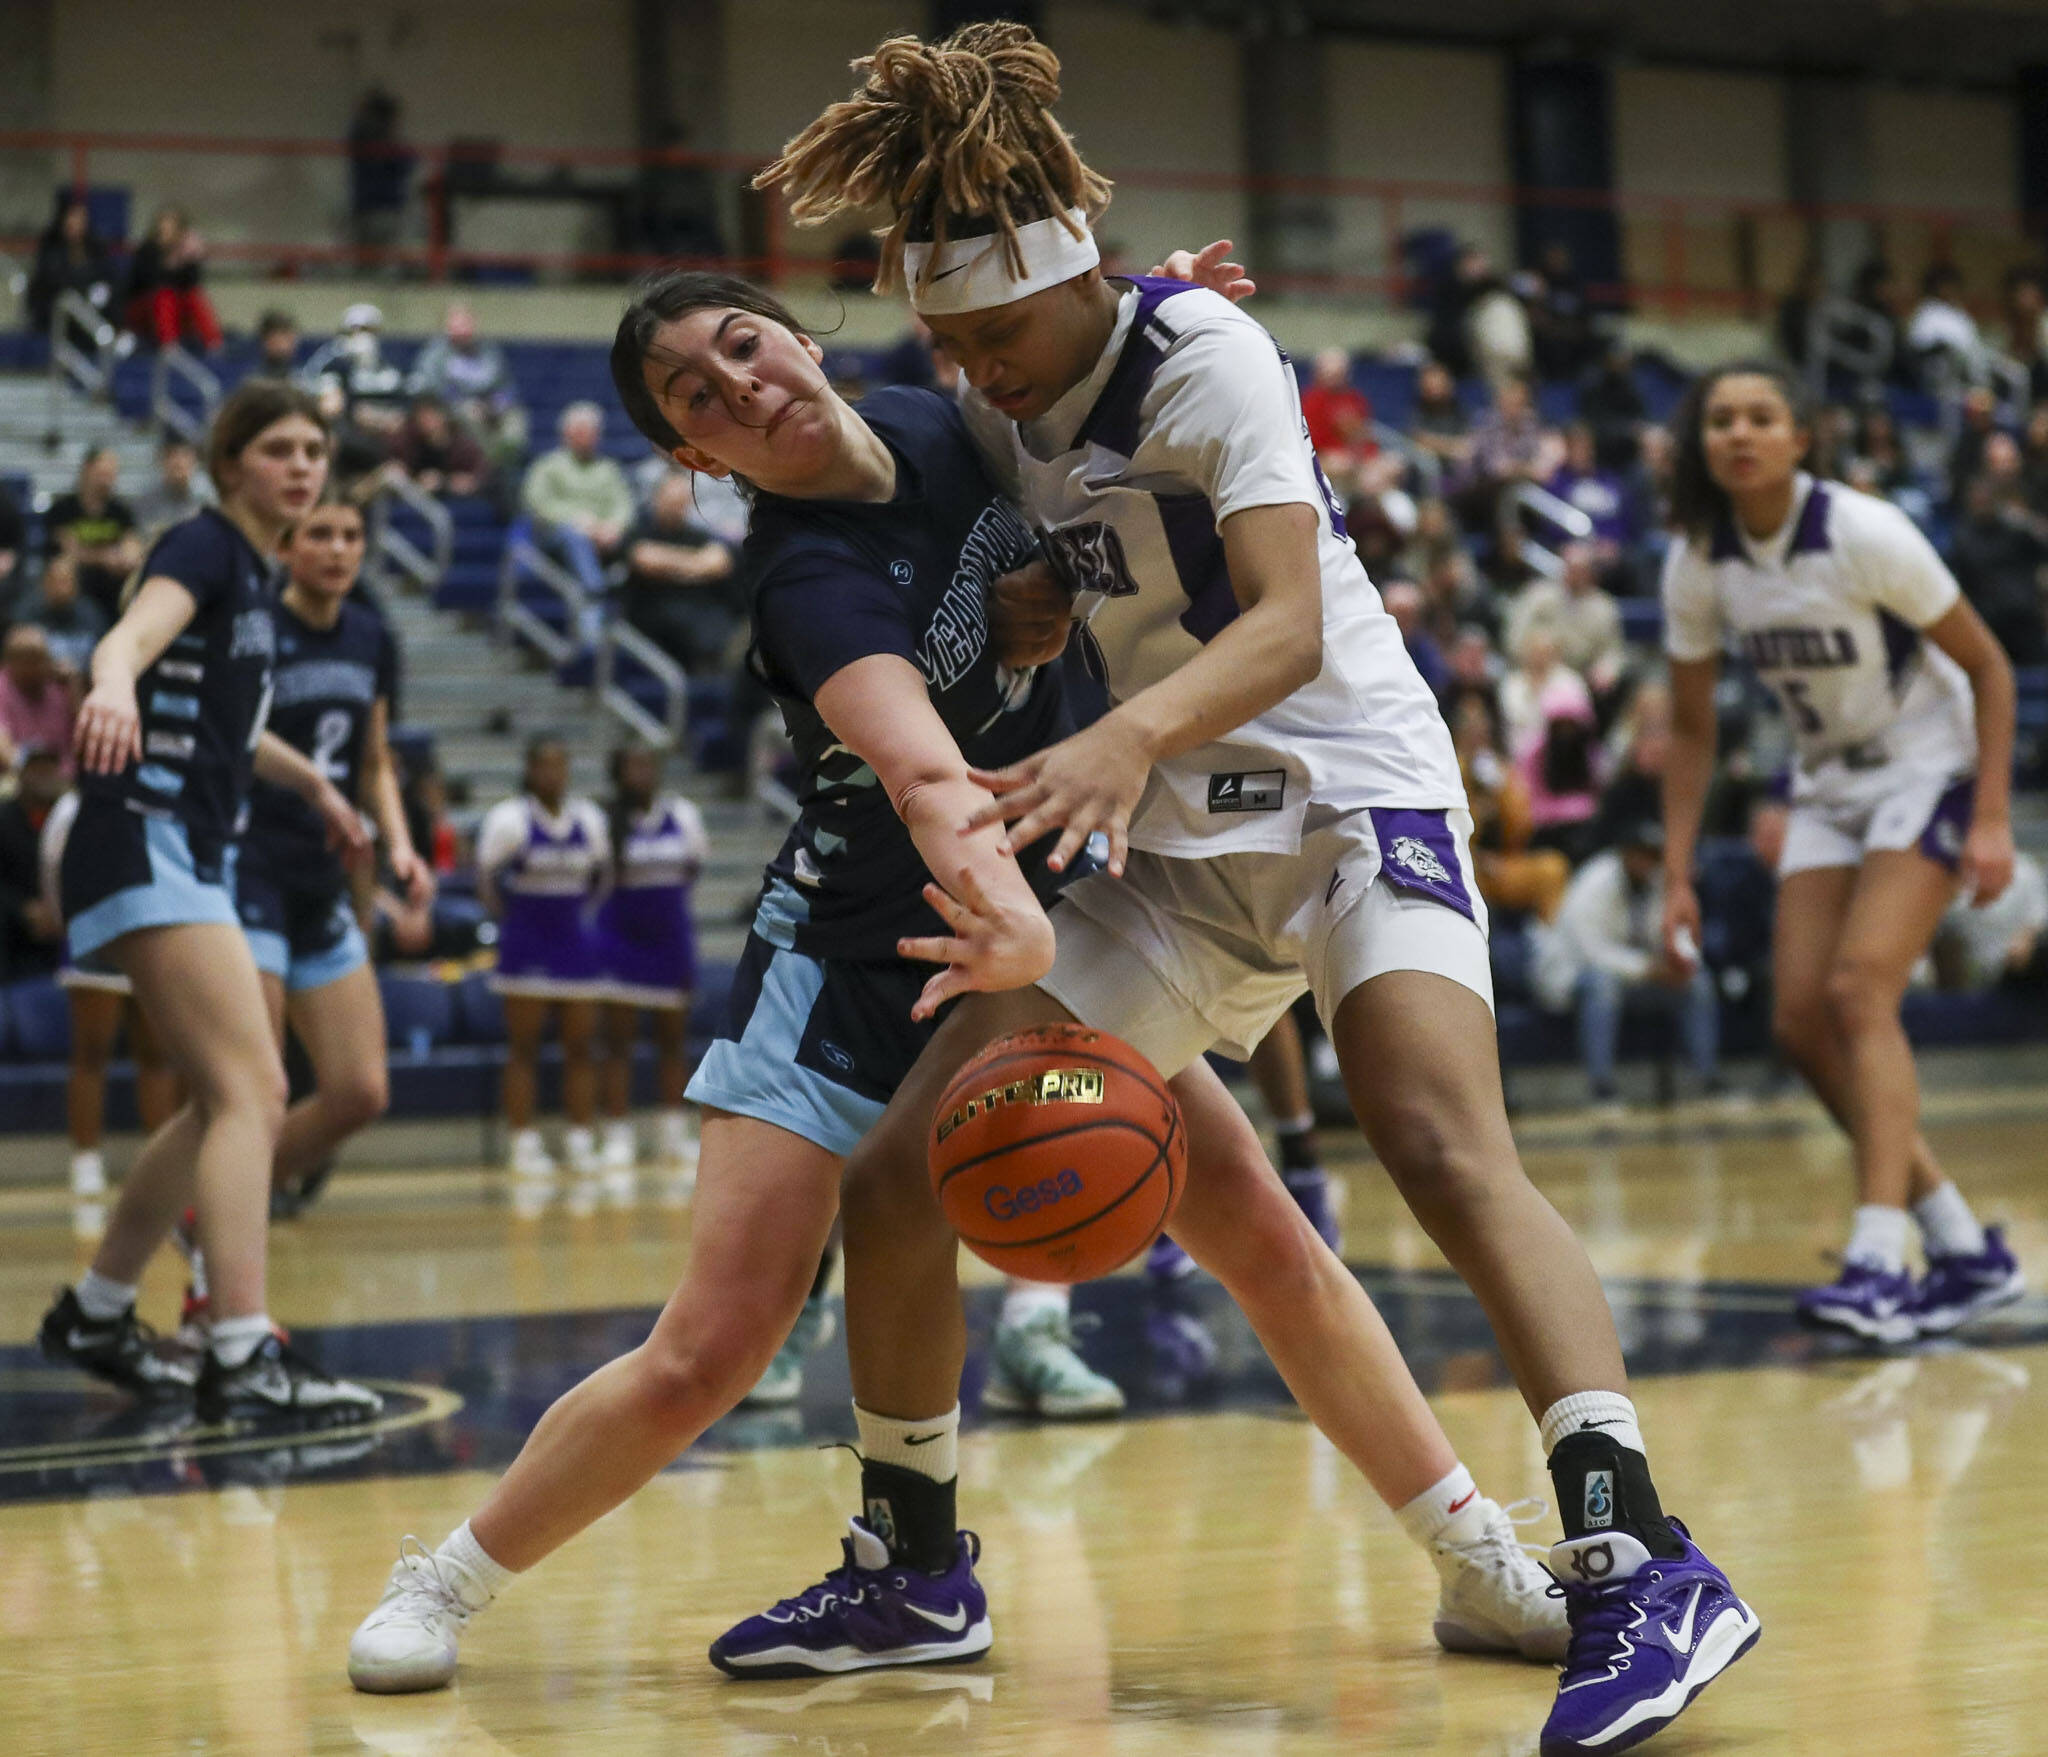 Meadowdale’s Natalie Durbin (10) and Garfield’s Rakiyah Jackson (20) fight for the ball during a 3A girls basketball state regional game at the Courter Family Athletic Pavilion in Bellevue on Friday. Garfield won 62-48. (Annie Barker / The Herald)